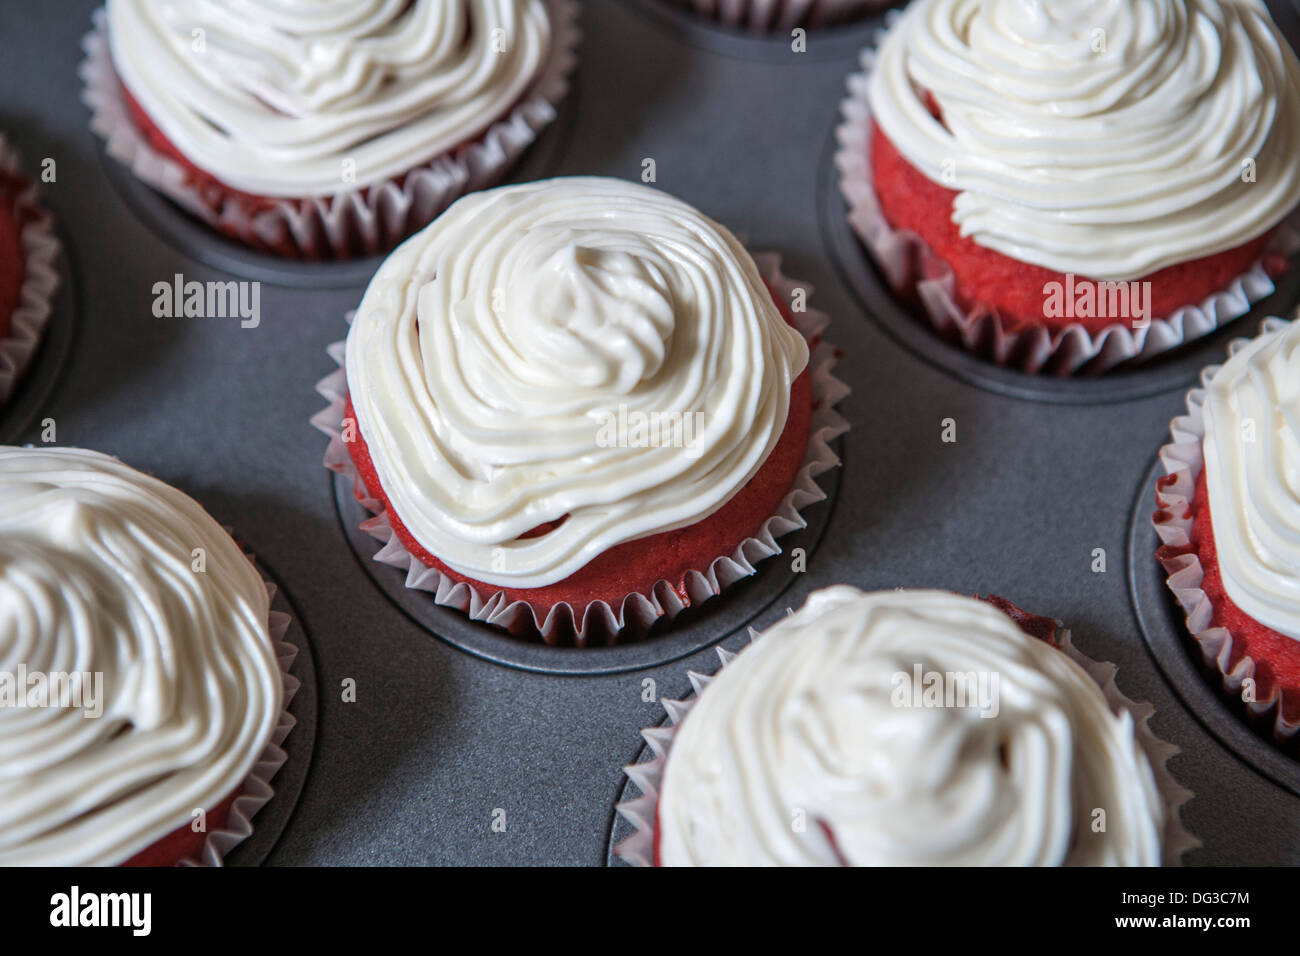 Red Velvet Cupcakes with Cream Cheese Icing, Close-Up, High Angle View Stock Photo